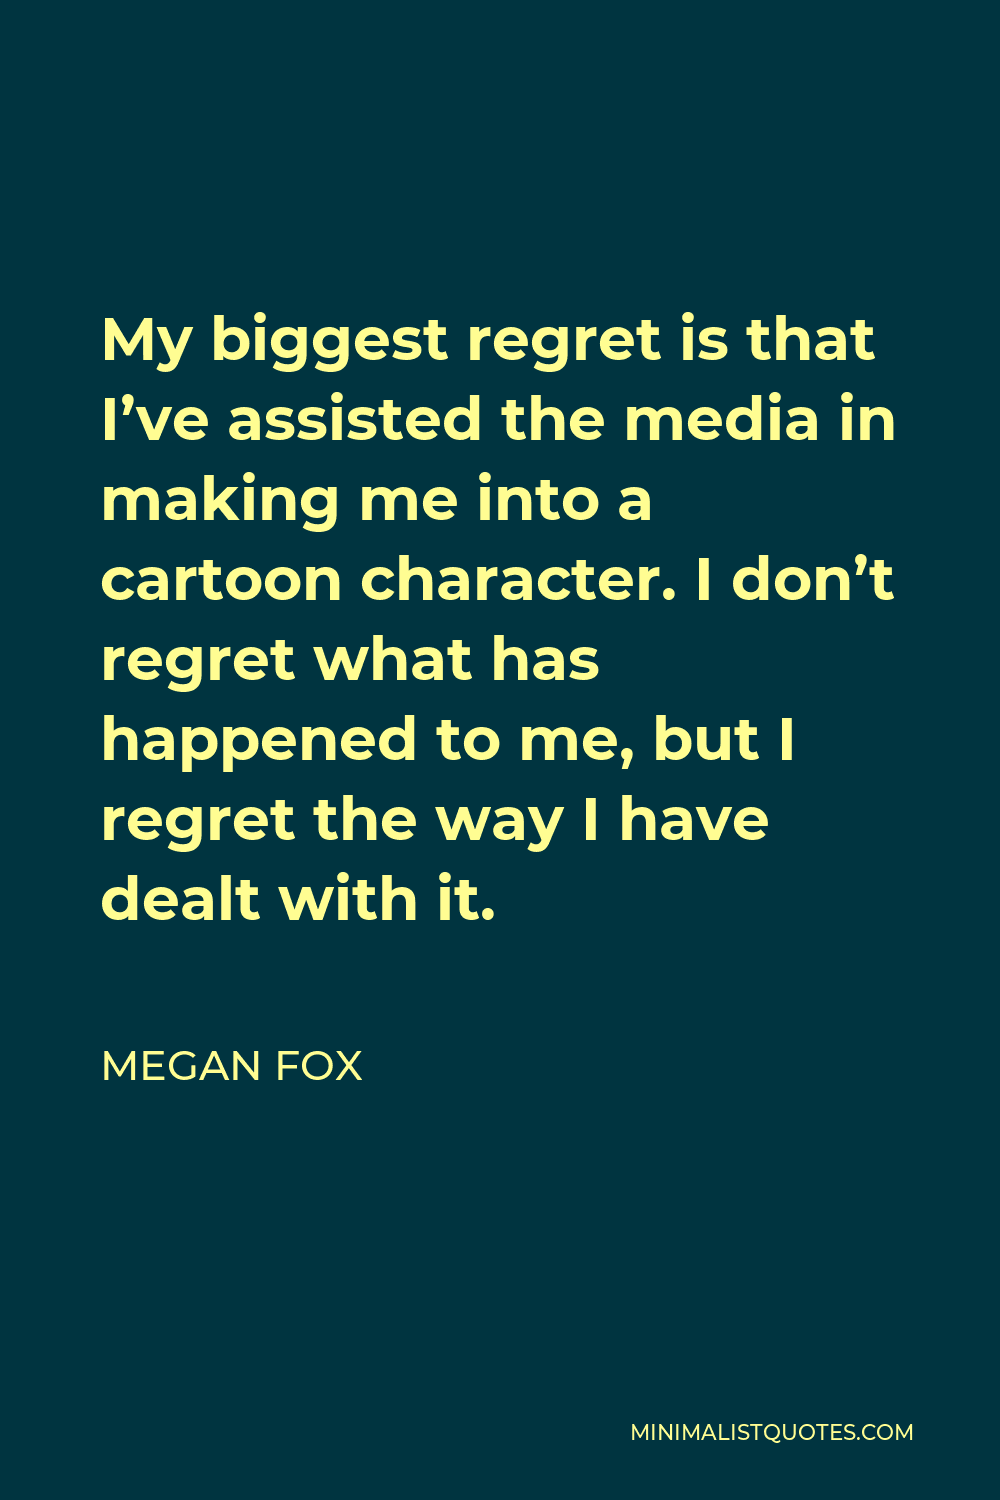 Megan Fox Quote - My biggest regret is that I’ve assisted the media in making me into a cartoon character. I don’t regret what has happened to me, but I regret the way I have dealt with it.